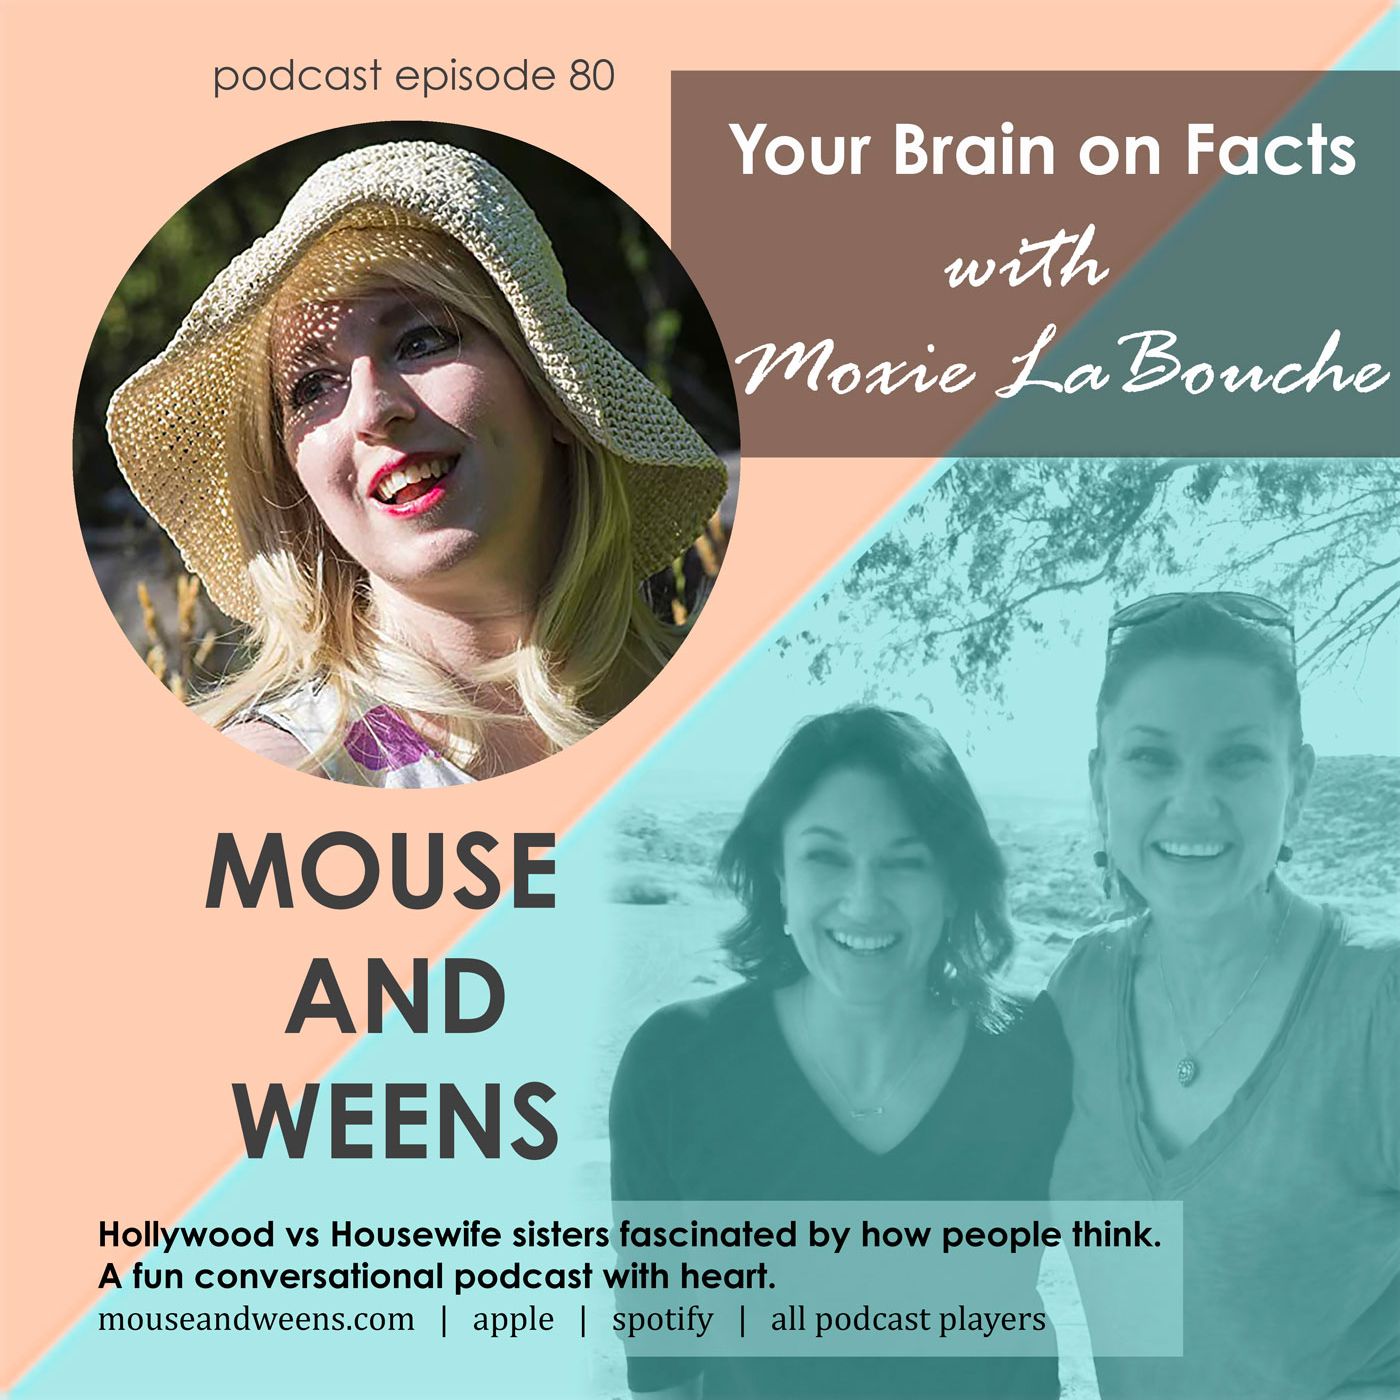 Your Brain On Facts with Moxie LaBouche